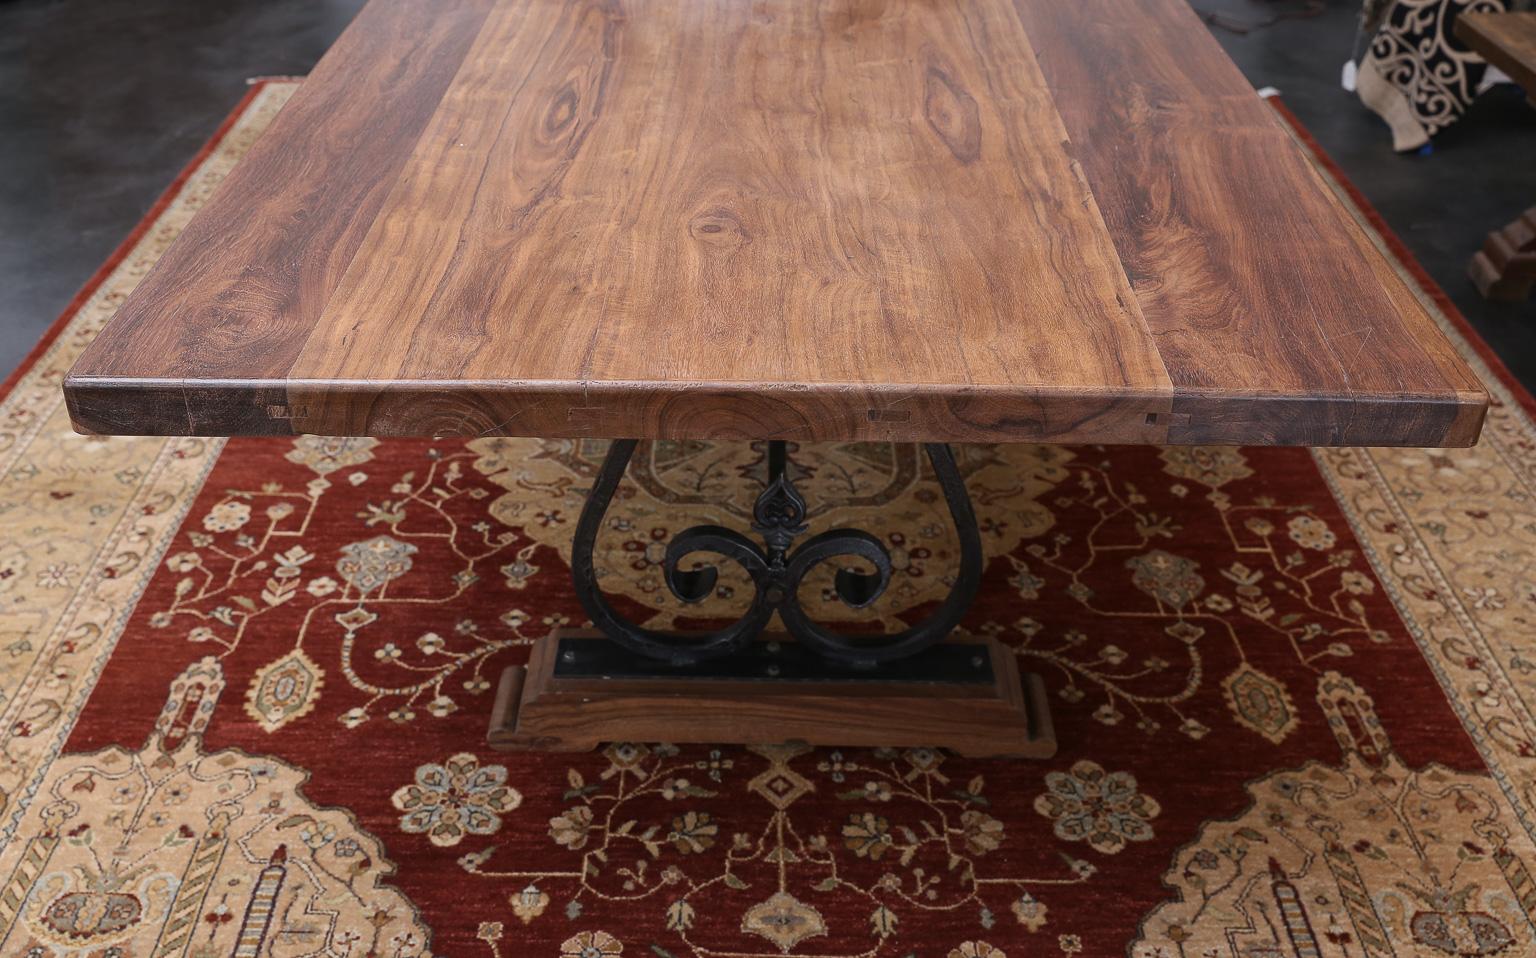 Thick fine solid teak wood top supported on two iron pedestals. Wood grain flow on the top is to be seen to know the quality of wood. Simple but elegant an extraordinary piece by any standard. The table is firm like a rock. Heavy hand forged wrought